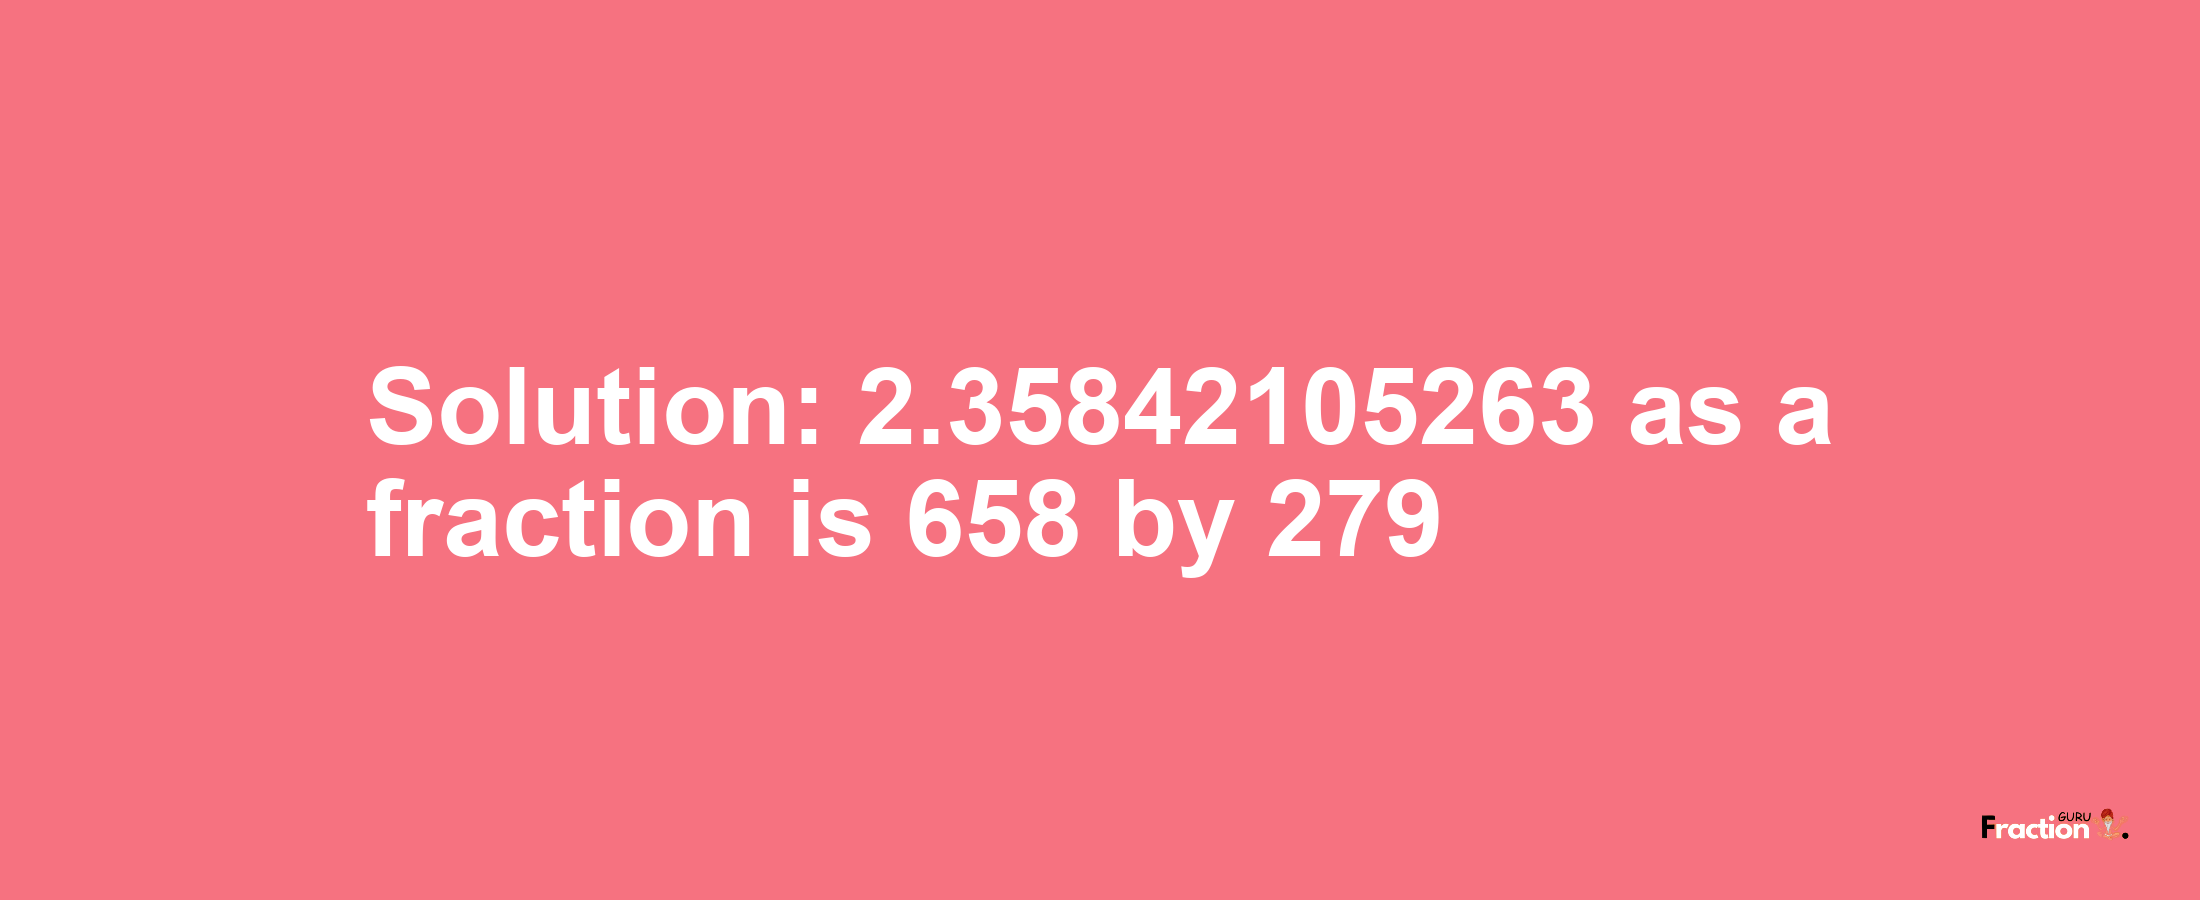 Solution:2.35842105263 as a fraction is 658/279